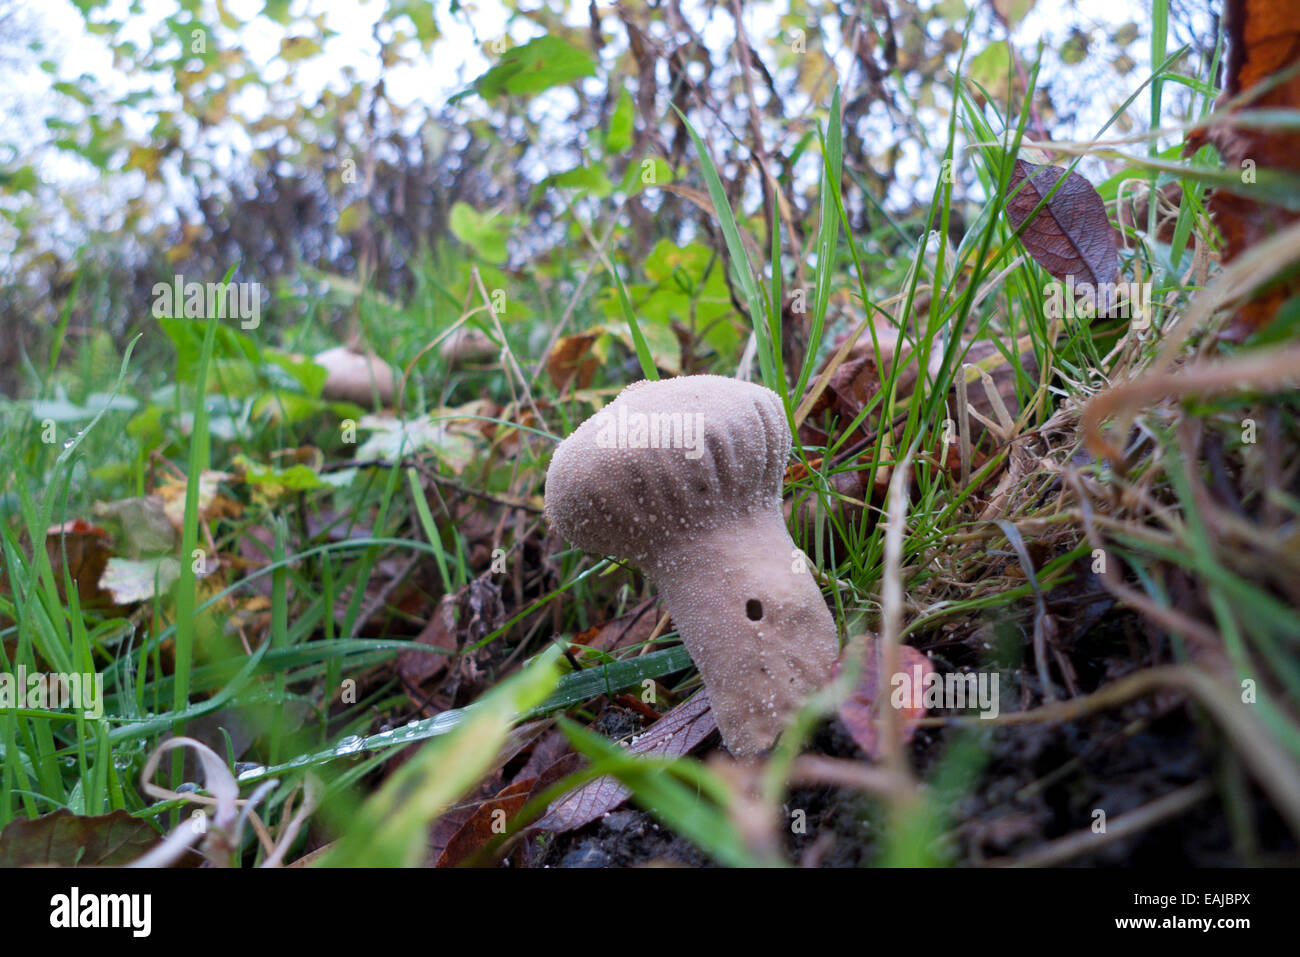 Carmarthenshire, Wales, UK. 16th Nov 2014. Stump puffball mushroom (Lycoperdon pyroformis) grows on a roadside in mild weather near Llandovery in Carmarthenshire Wales UK. An edible fungi stump puffballs must be eaten while the flesh is still white right through the fleshy body.  As it can be confused with young Amanita mushrooms care should be taken to identify properly when foraging. Kathy deWitt/AlamyLiveNews Stock Photo